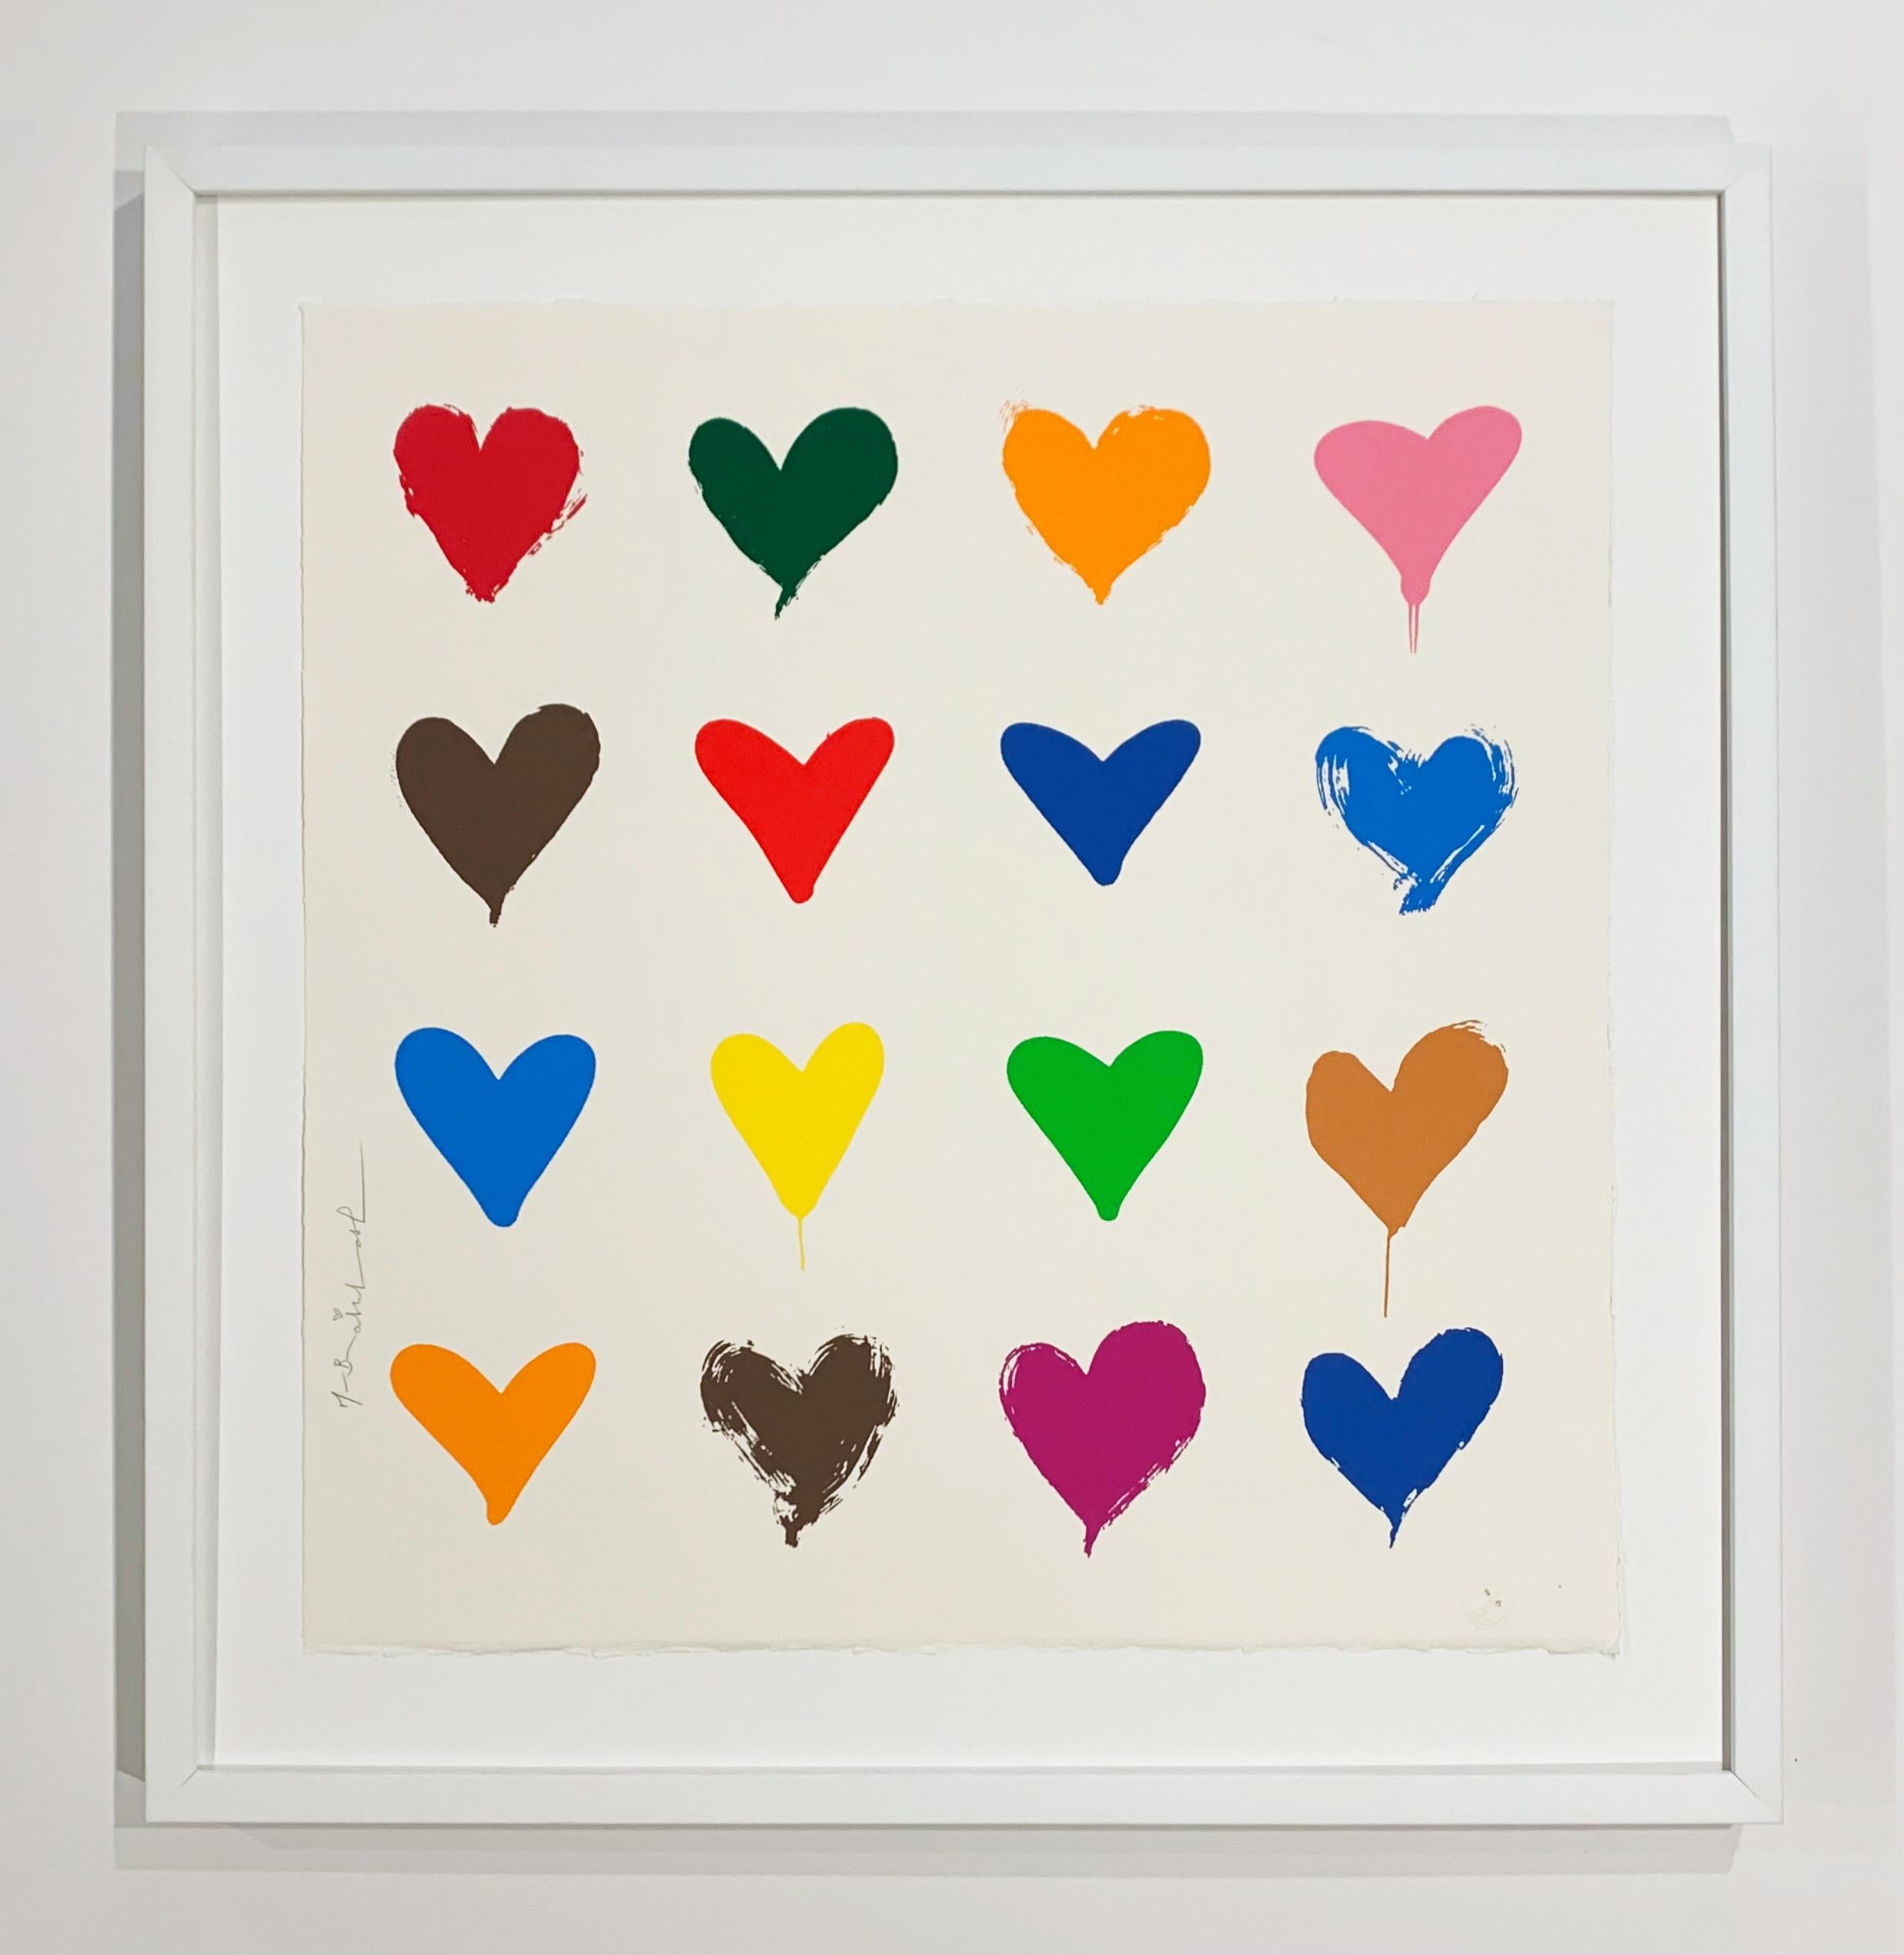 All You Need is He(Art) - Print by Mr Brainwash